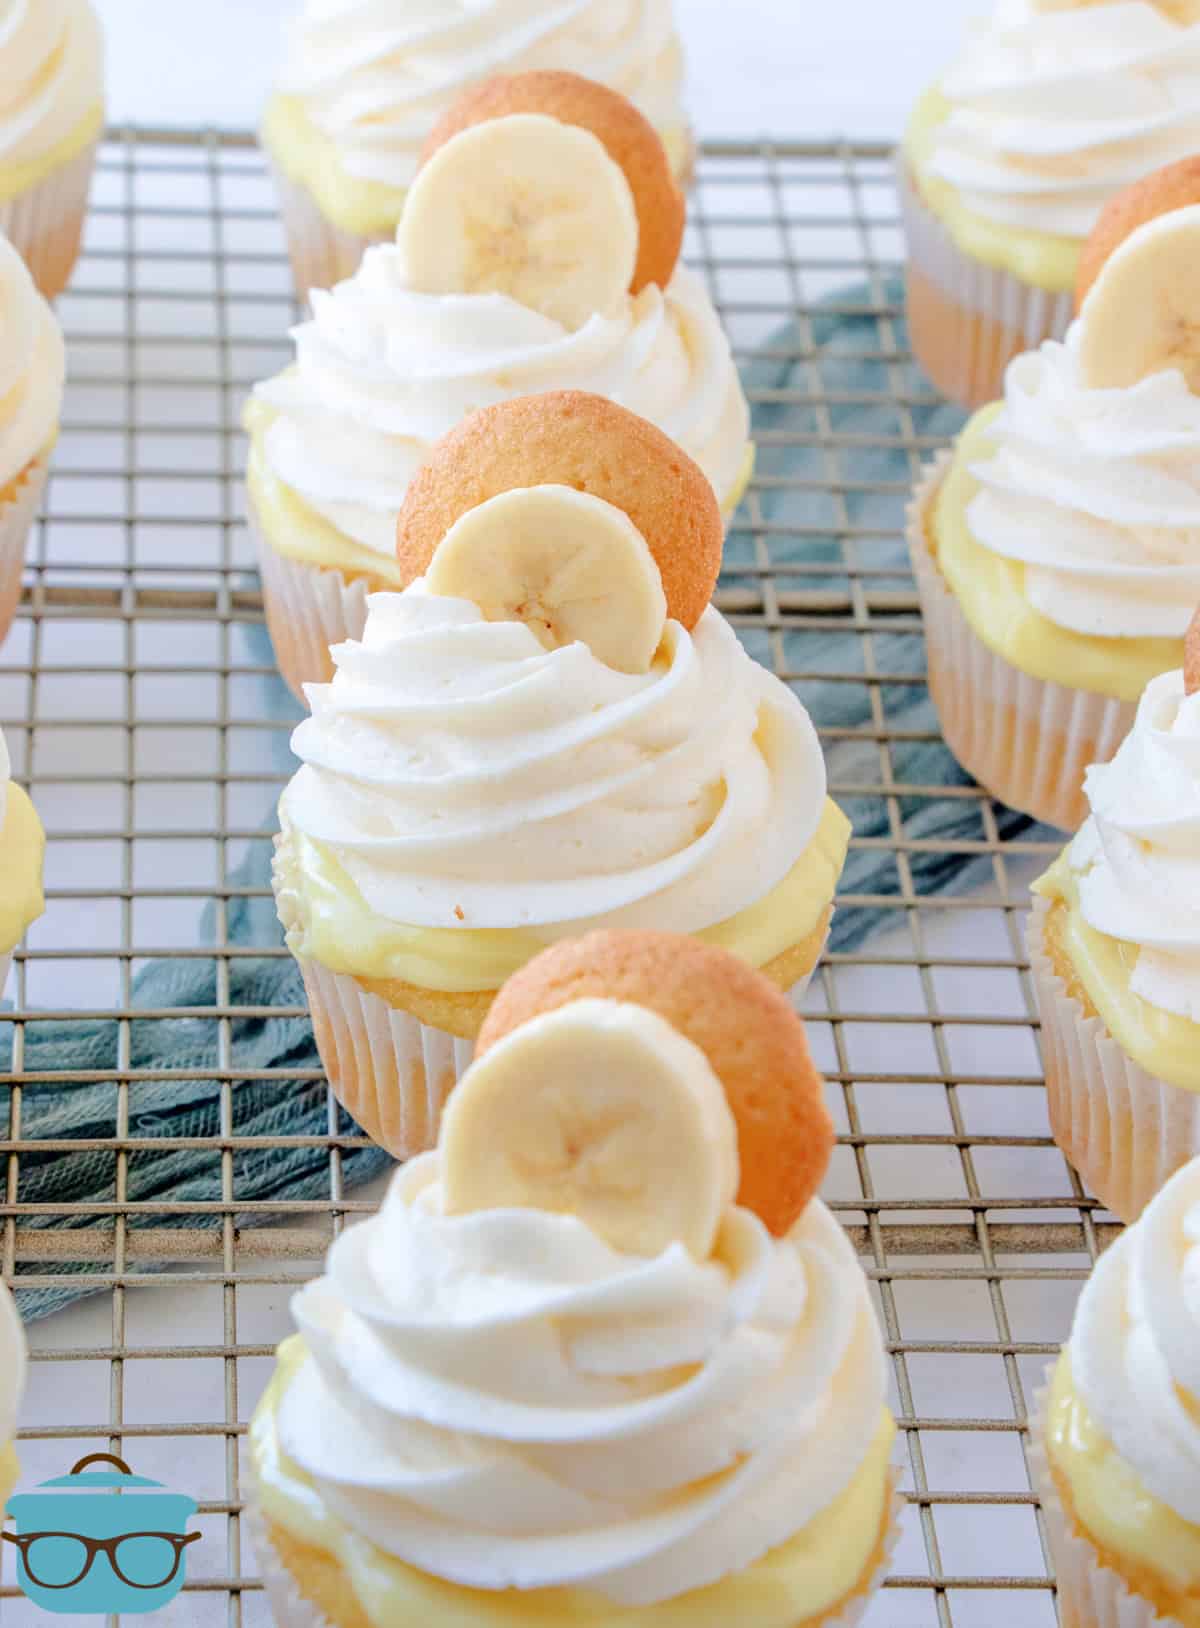 Finished frosted cupcakes topped with a banana slice and vanilla wafer on wire rack.